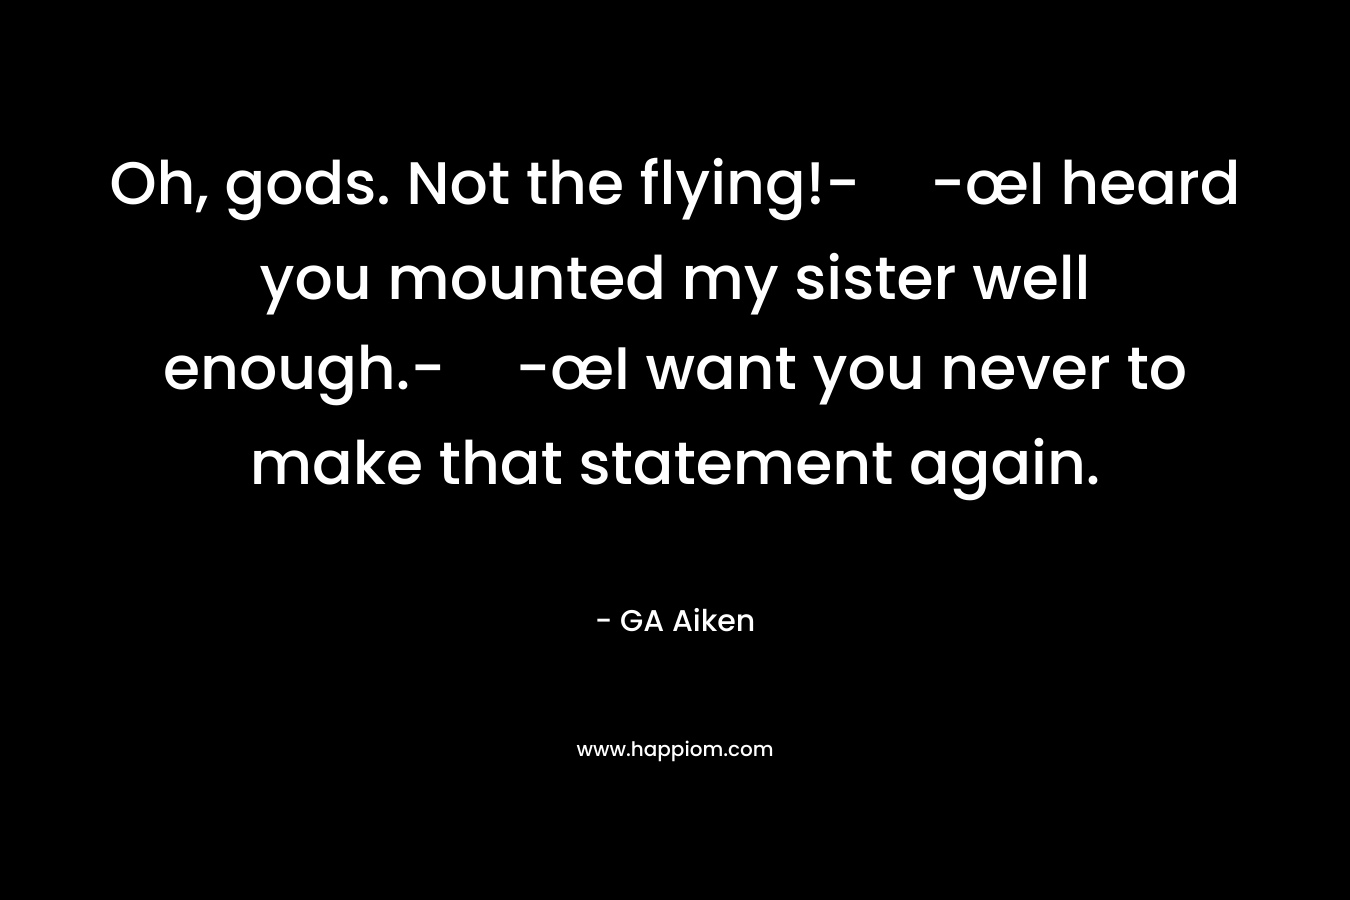 Oh, gods. Not the flying!--œI heard you mounted my sister well enough.--œI want you never to make that statement again. – GA Aiken